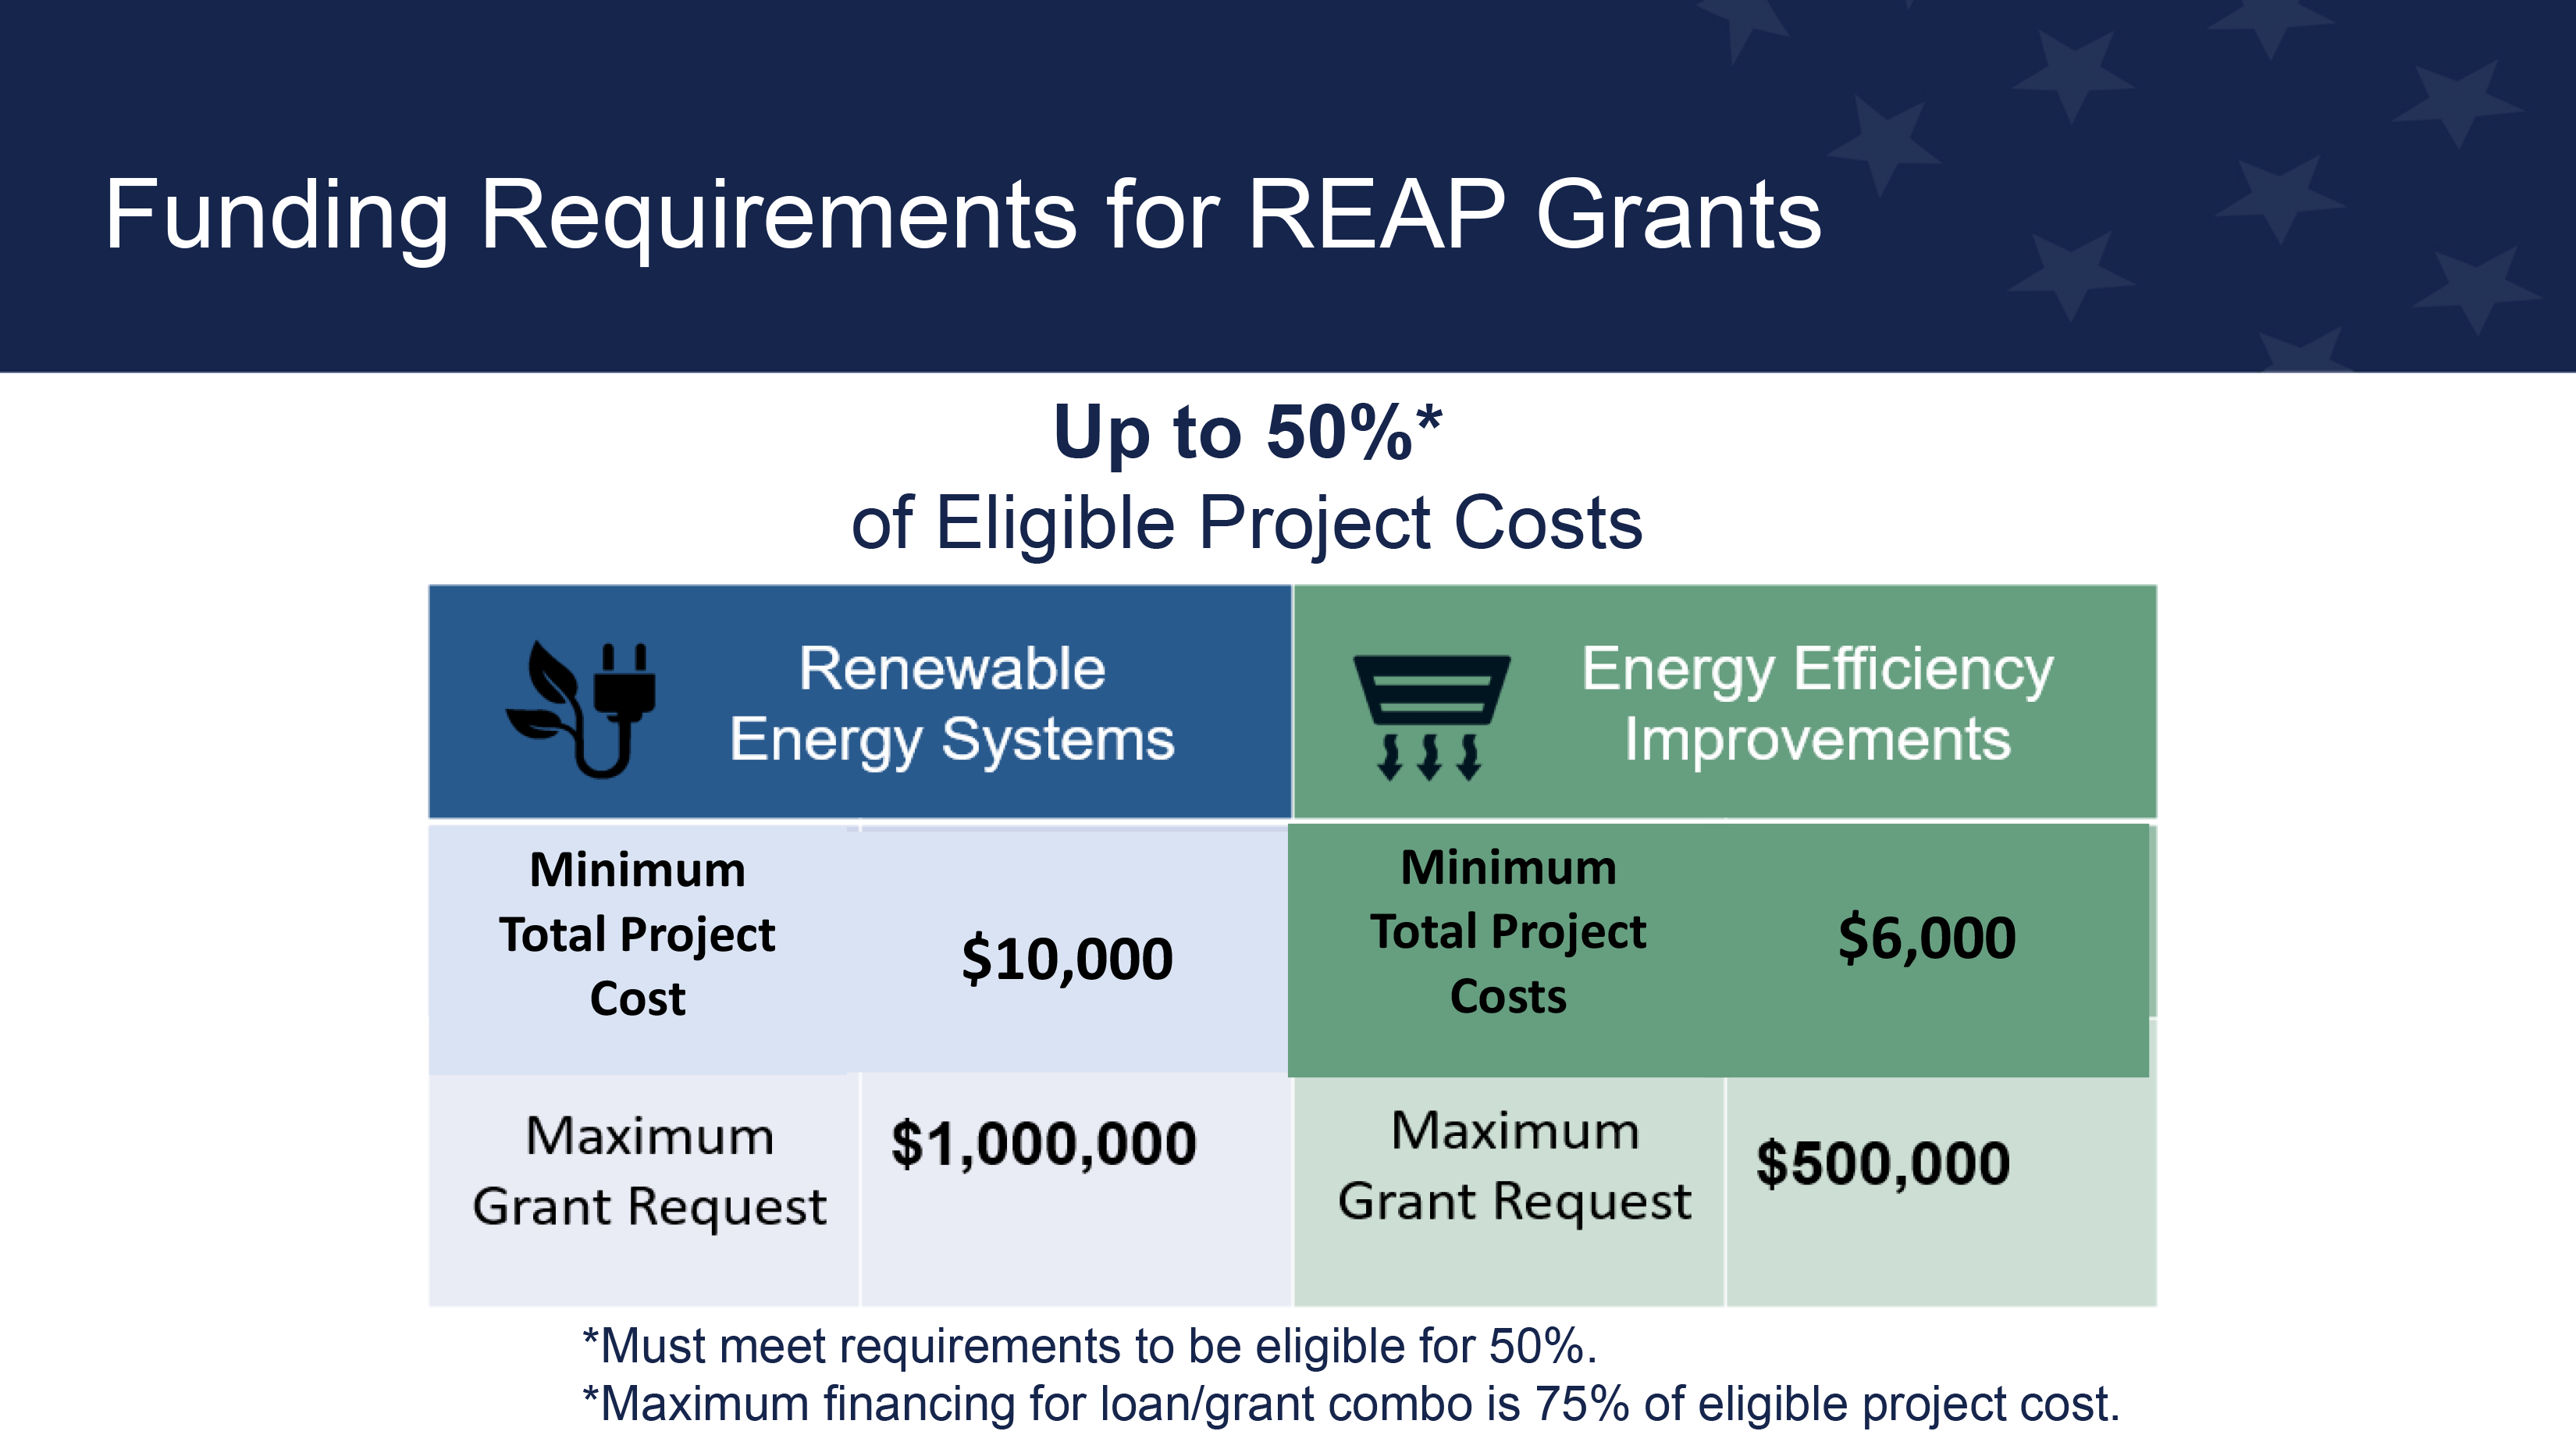 Up to 50% of Eligible Costs, Renewable Energy Systems, Miniumu Total Project Cost, $10,000, Maximum Grant Request $1,000,000, Energy Efficiency Improvements, Minimum Total Project Costs, $6,000, Maximum GrantRequest $500,000, *Must meet requirements to be eligible for 50%*. *Maximum financing for loan/grant combo is 75% of eligible project cost.